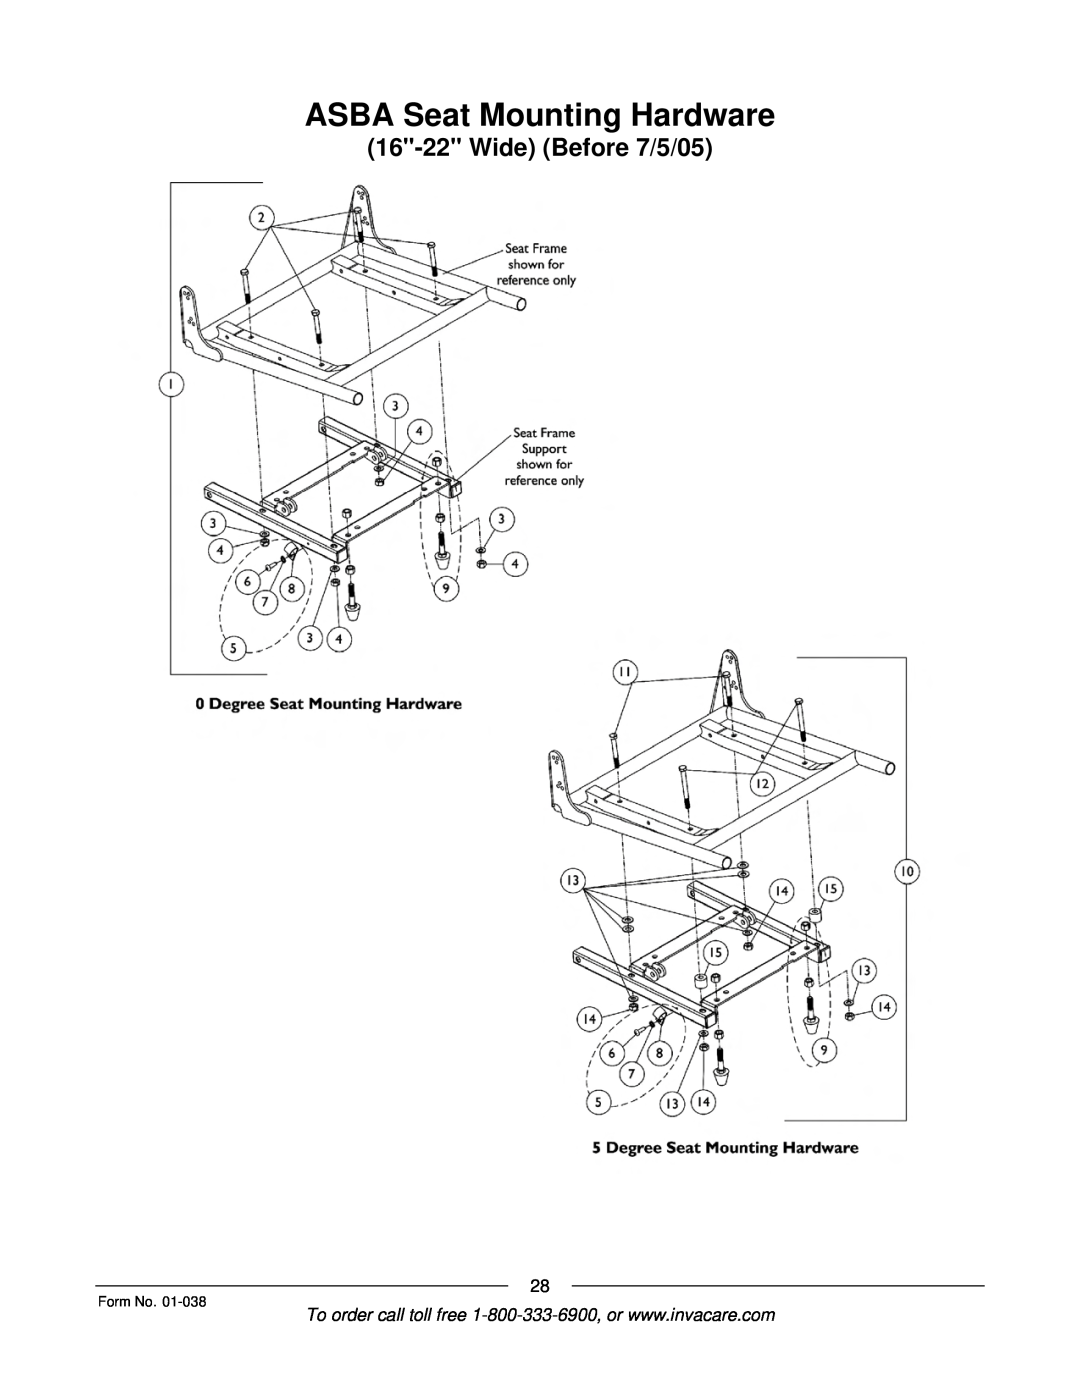 Invacare ESS-PTO, PTO-STM manual ASBA Seat Mounting Hardware, Wide Before 7/5/05, Form No 